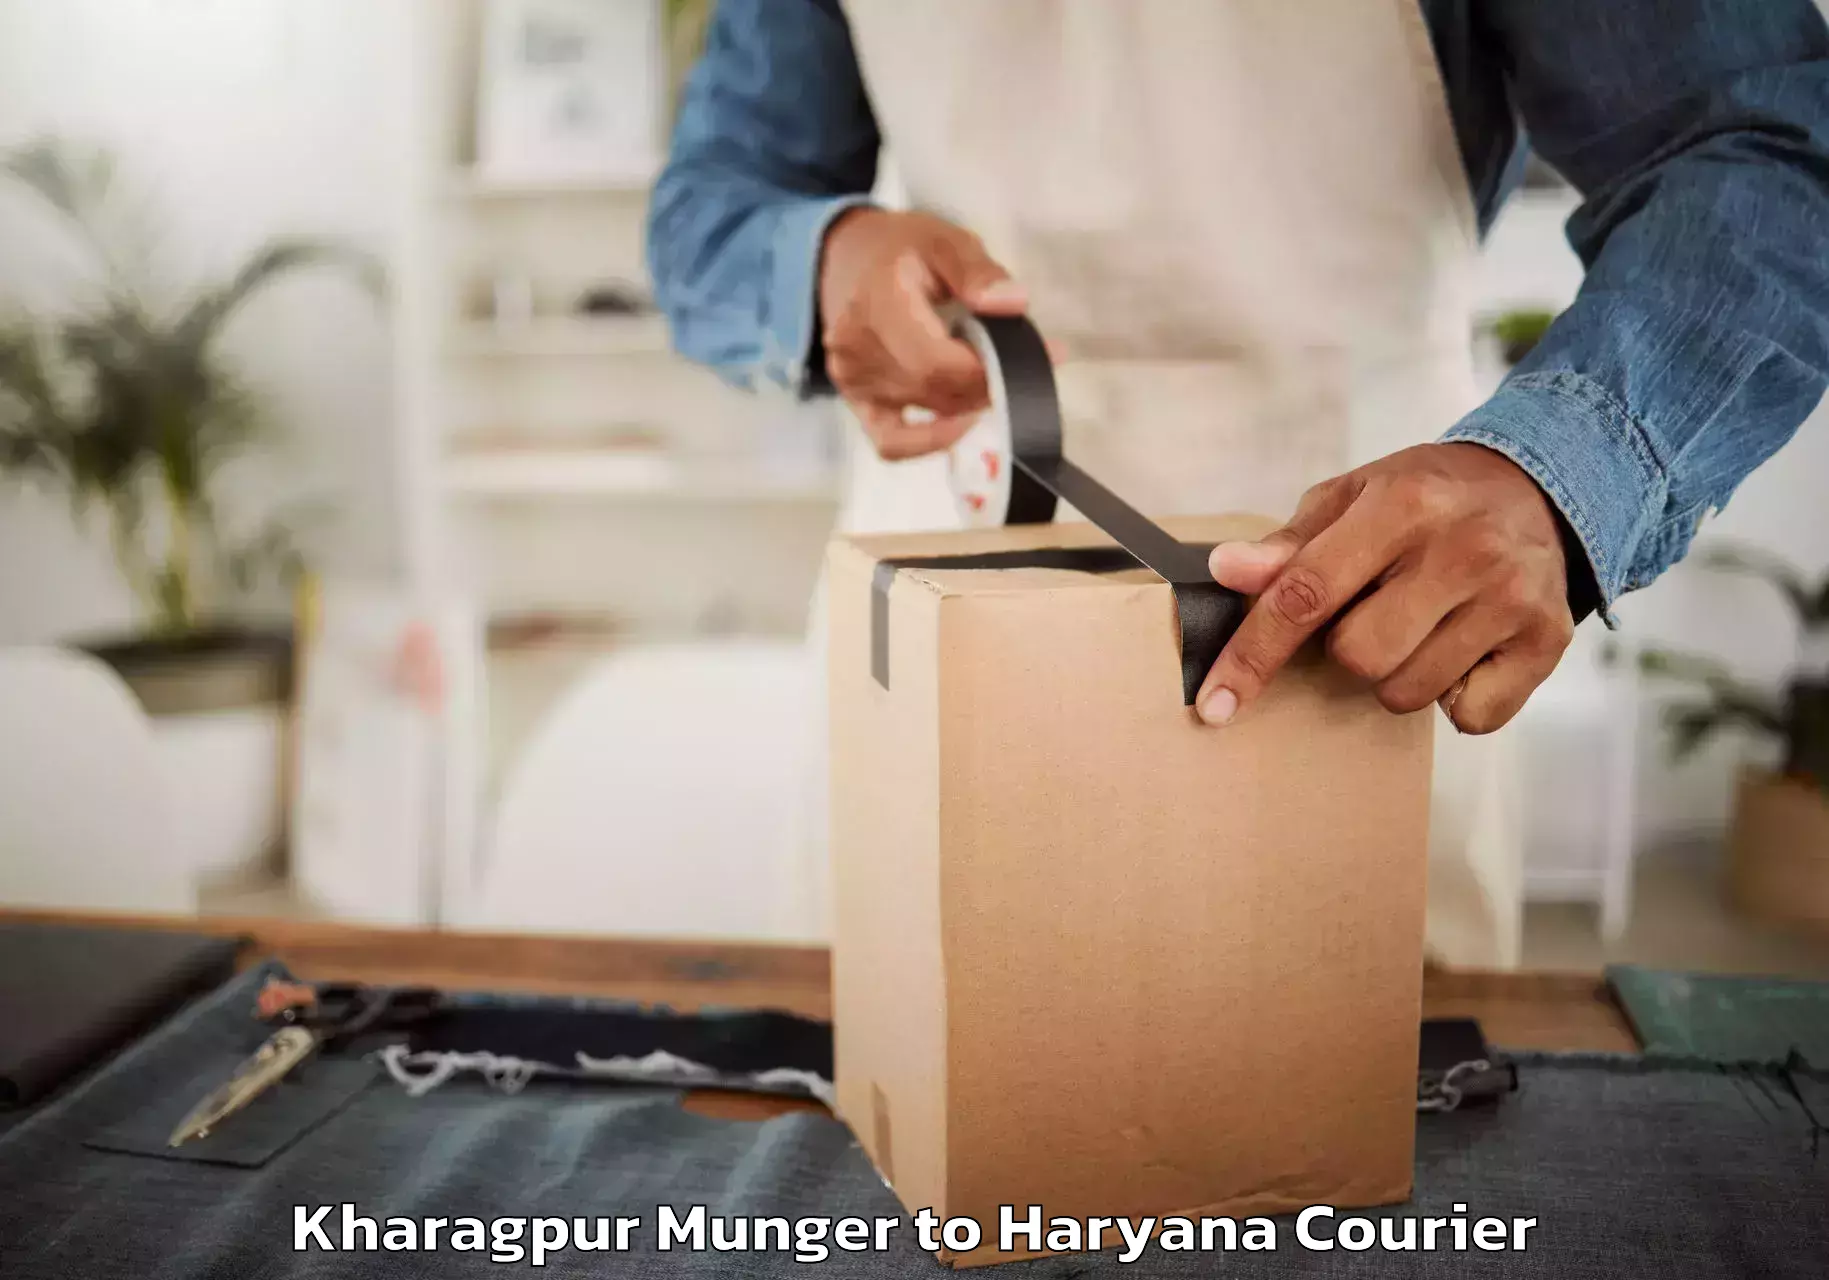 Furniture delivery service Kharagpur Munger to IIIT Sonepat